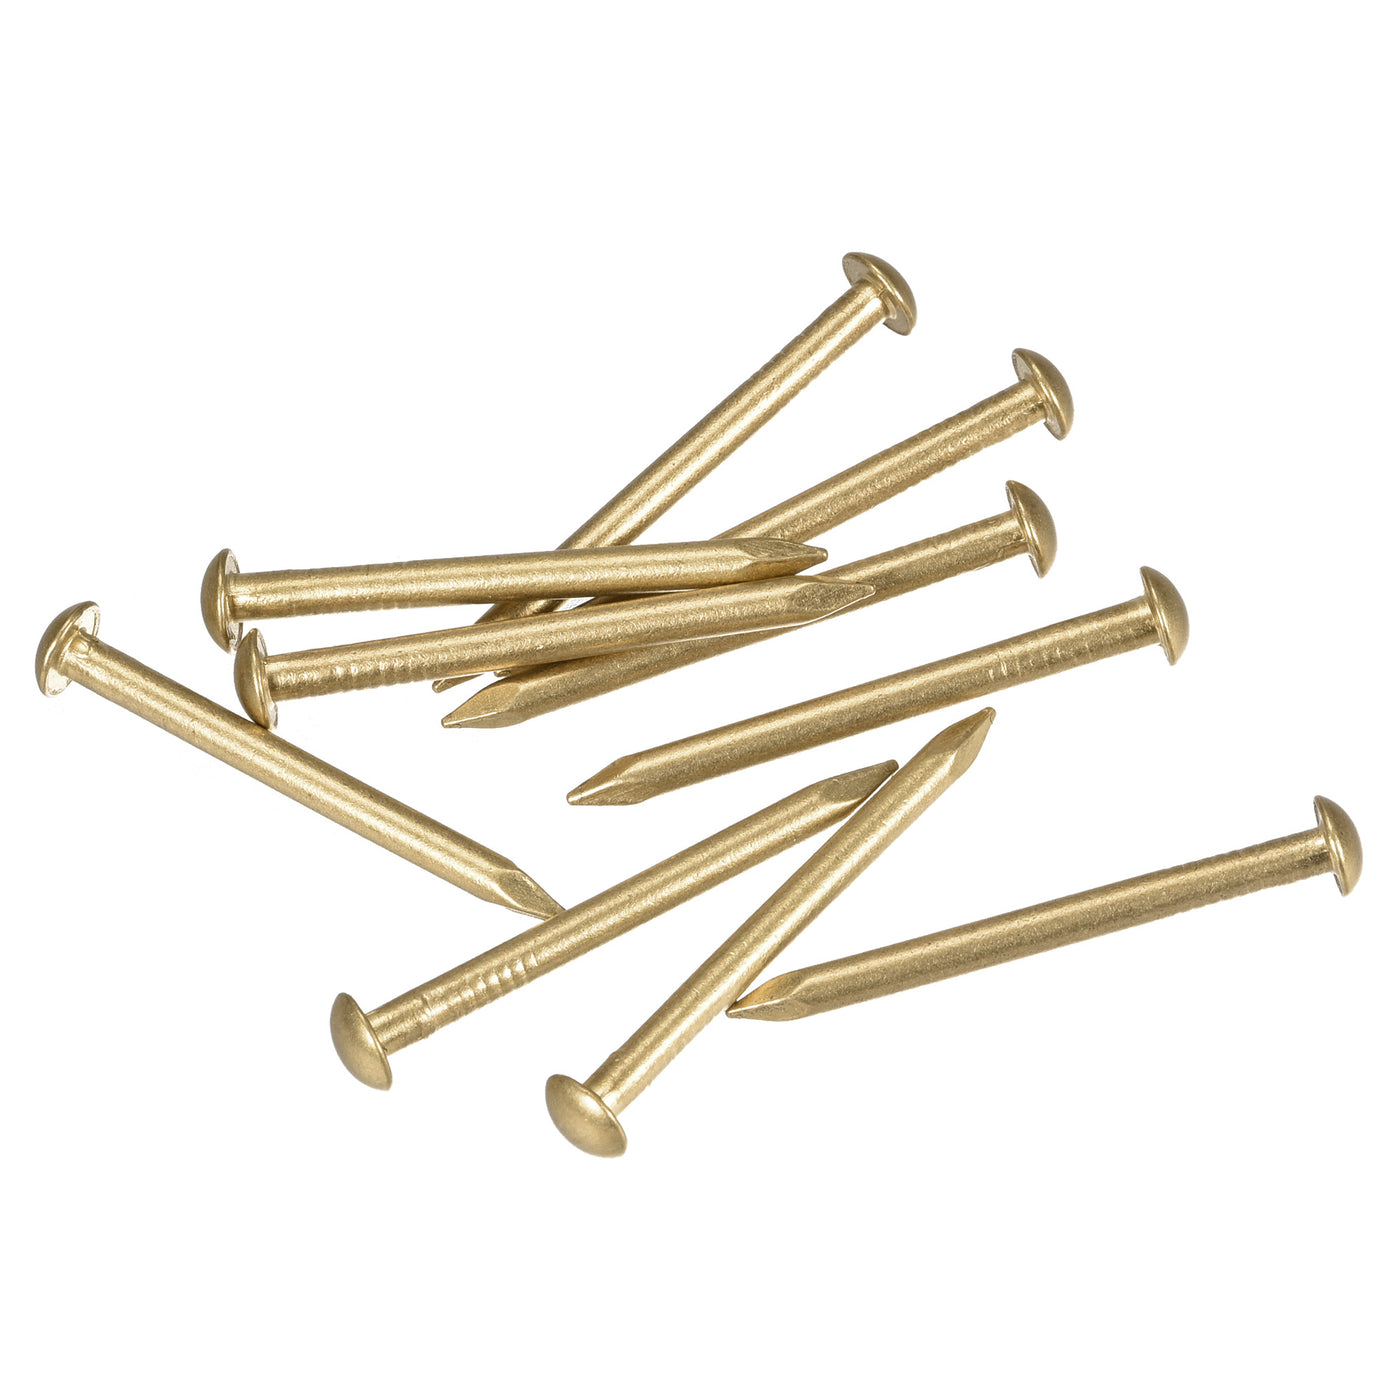 Uxcell Uxcell Small Tiny Brass Nails 2.8x35mm for DIY Decorative Pictures Wooden Boxes Household Accessories 10pcs